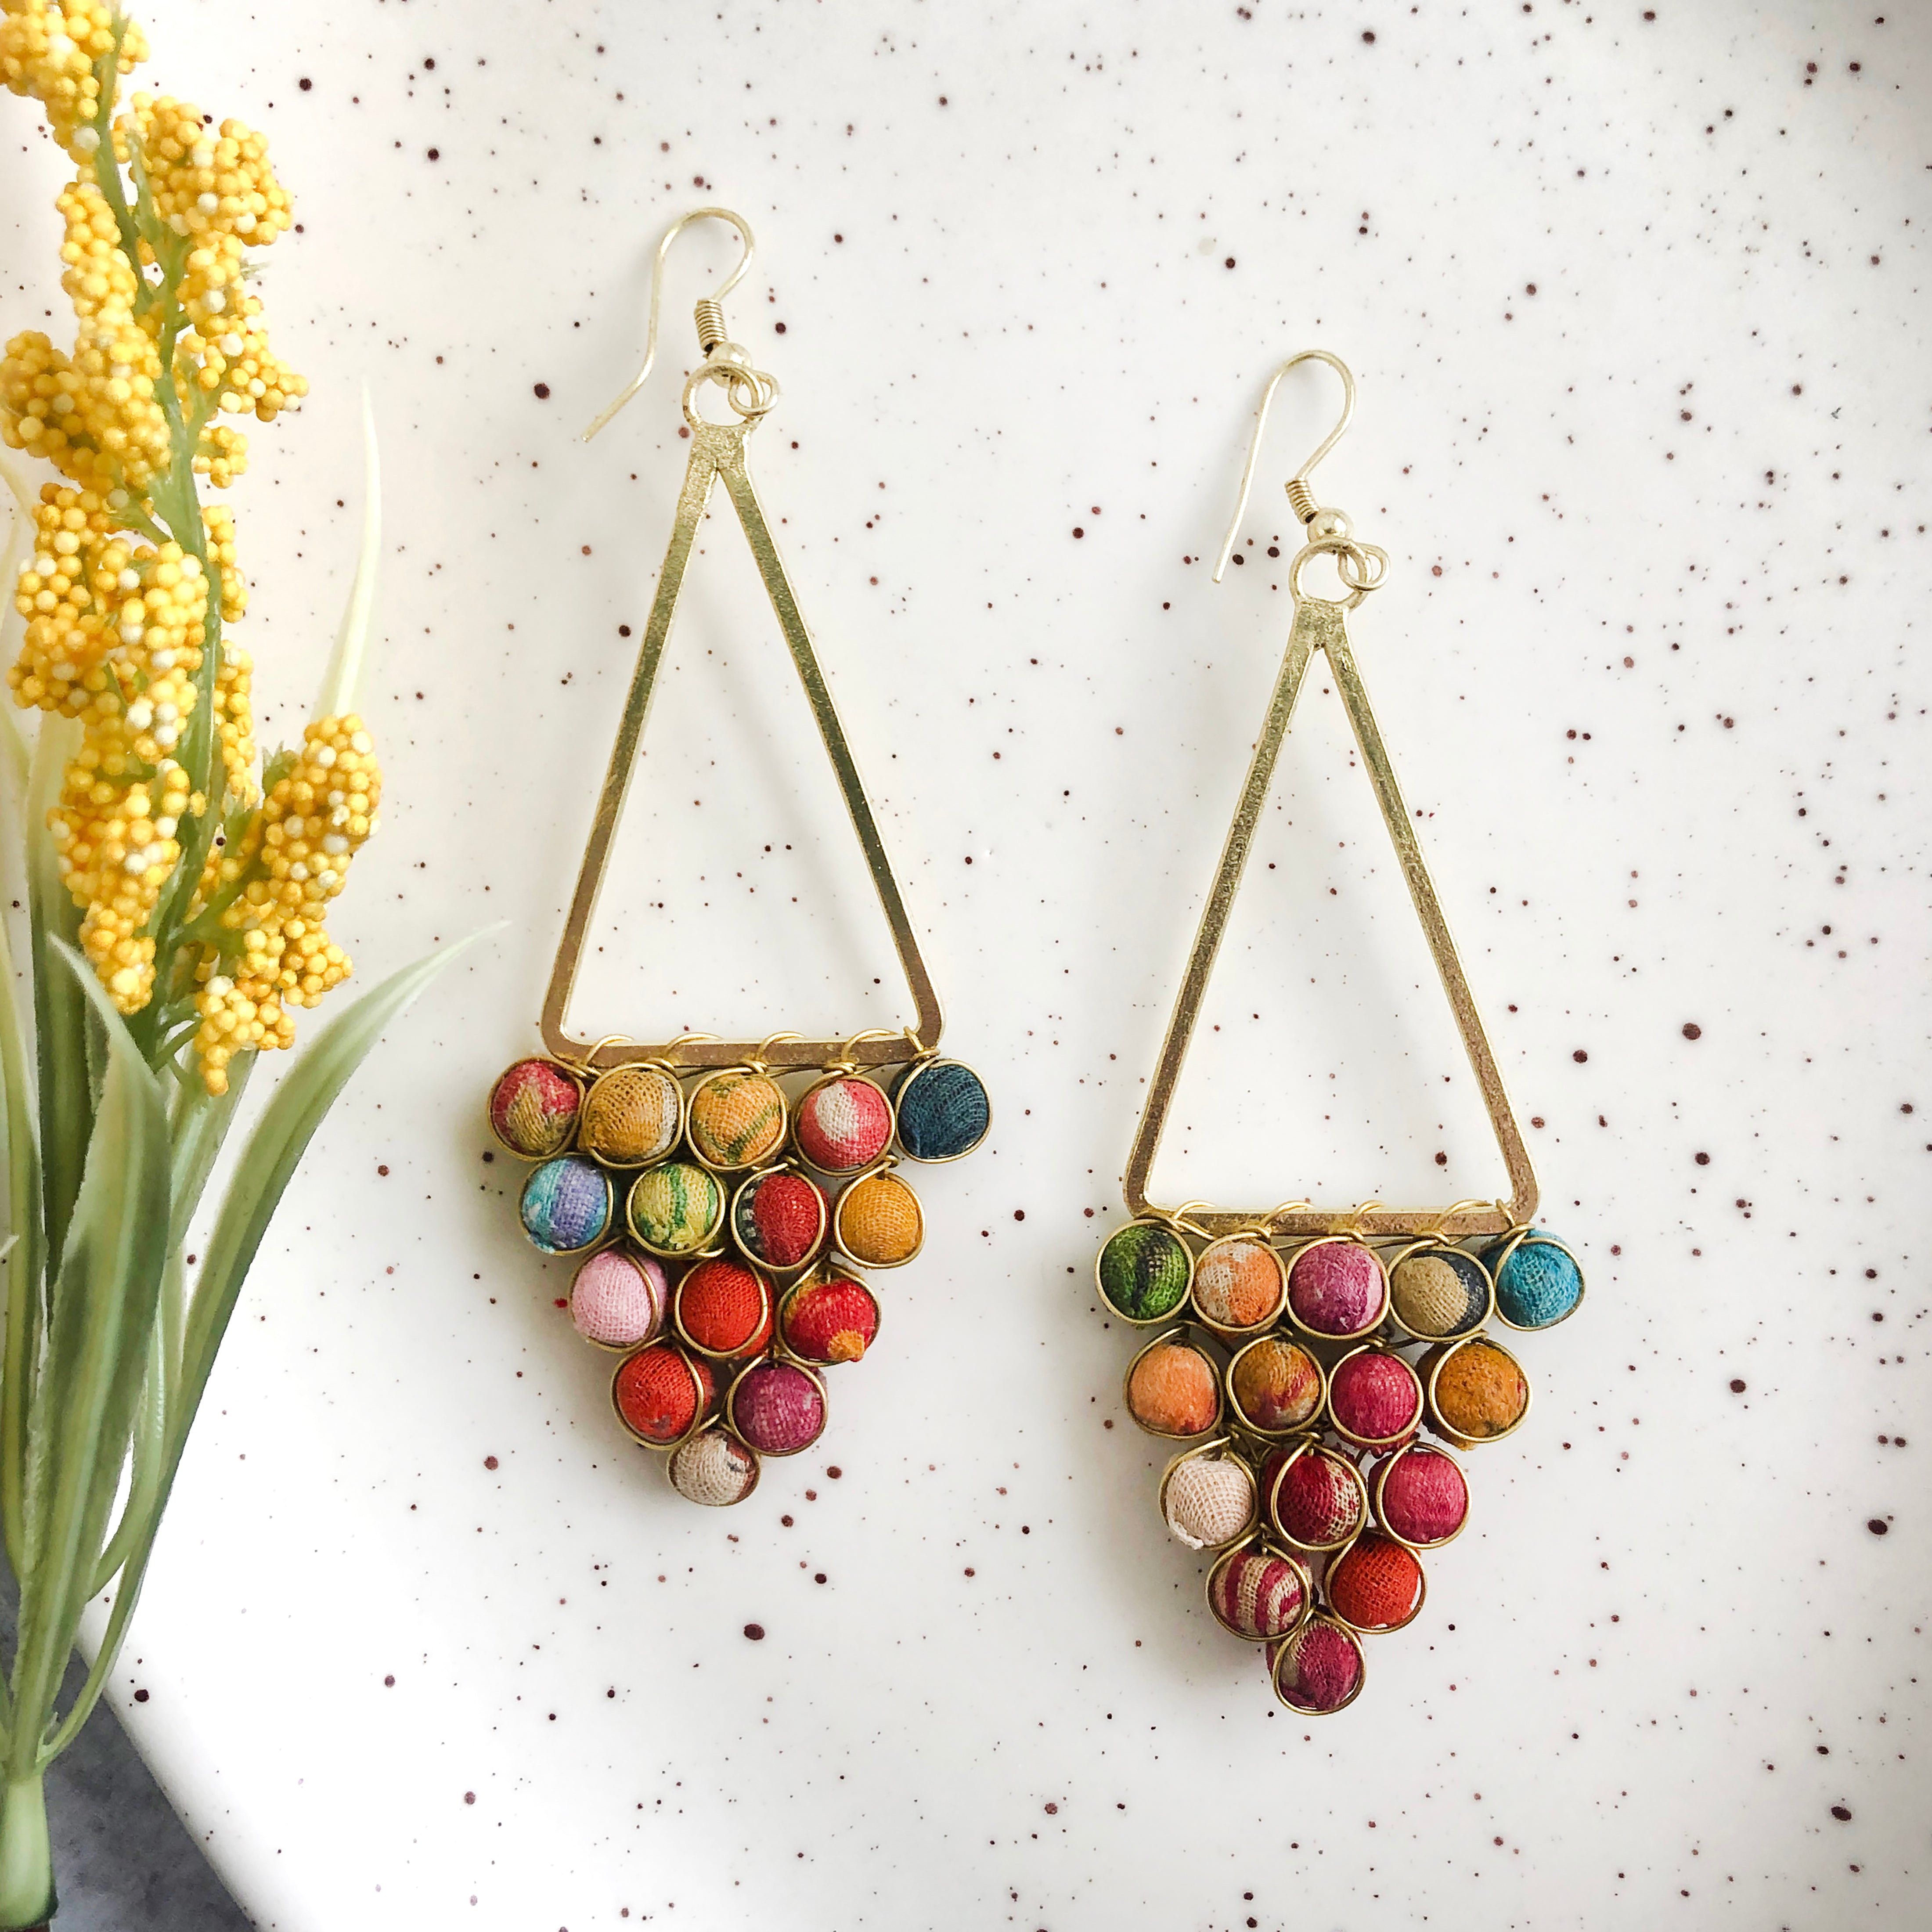 A triangle made from textile-wrapped beads and gold wire hangs from a golden triangle frame to form these earrings.